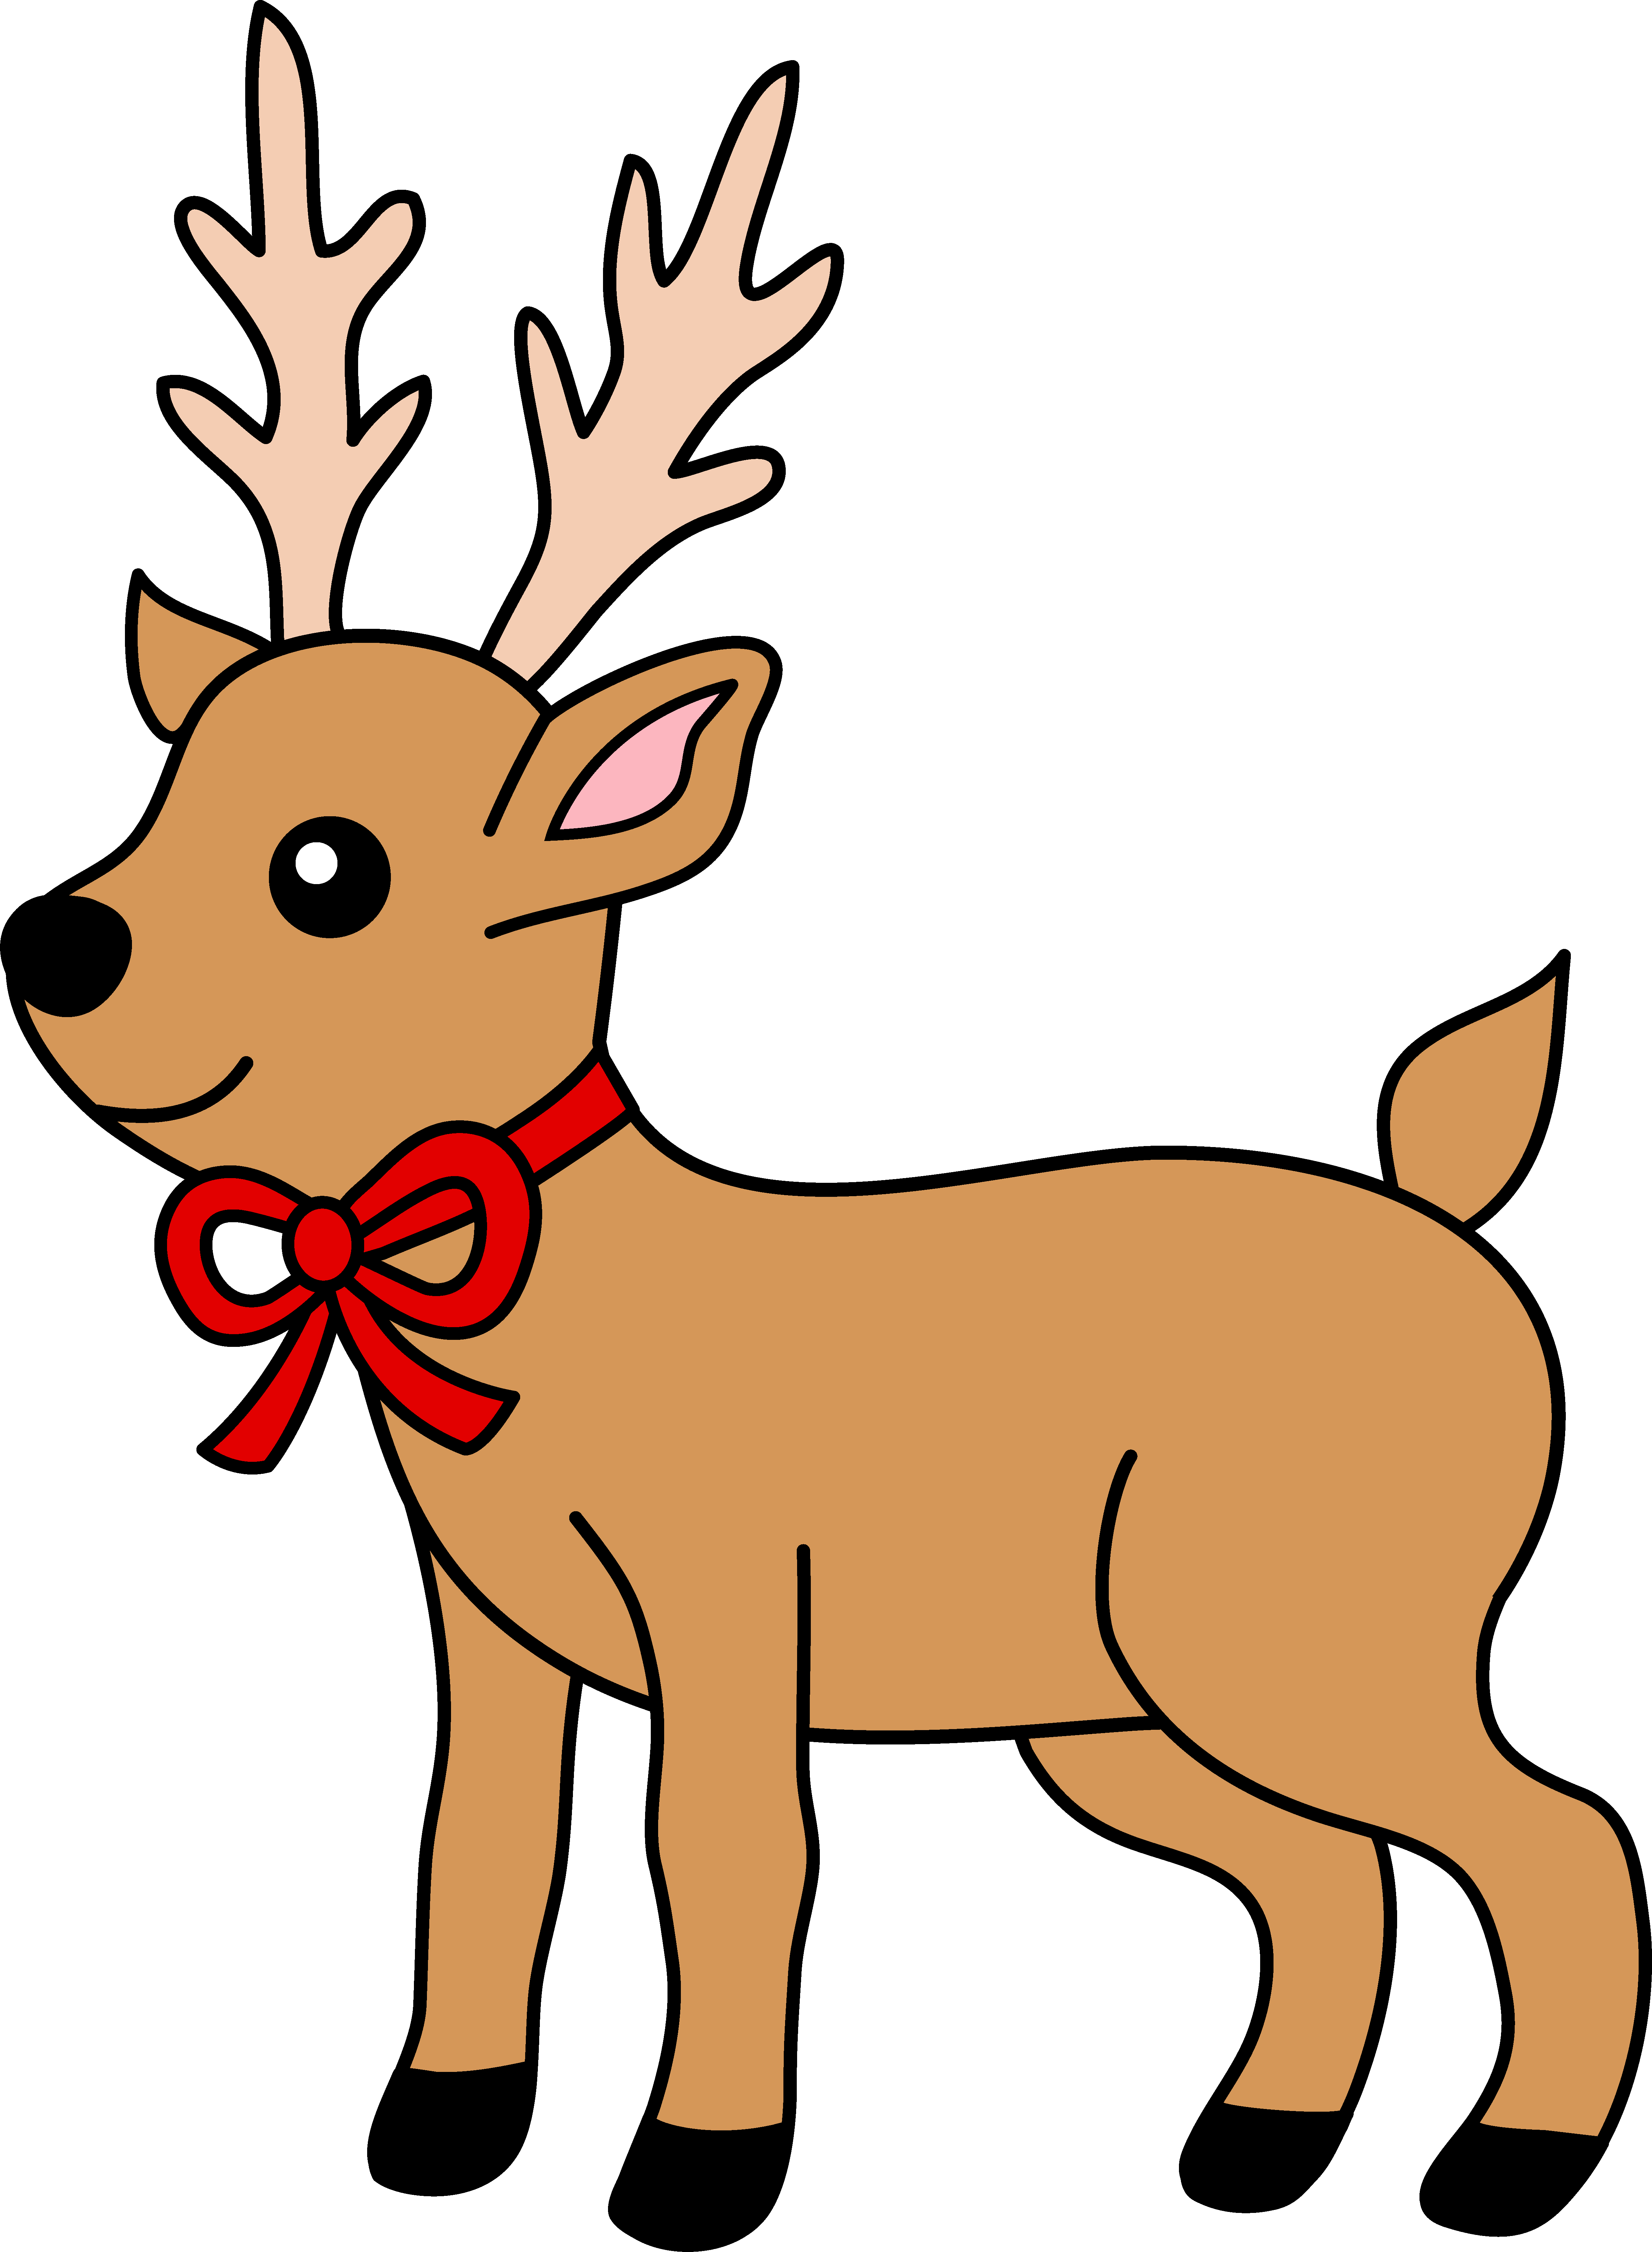 Christmas Reindeer With Red Ribbon - Free Clip Art